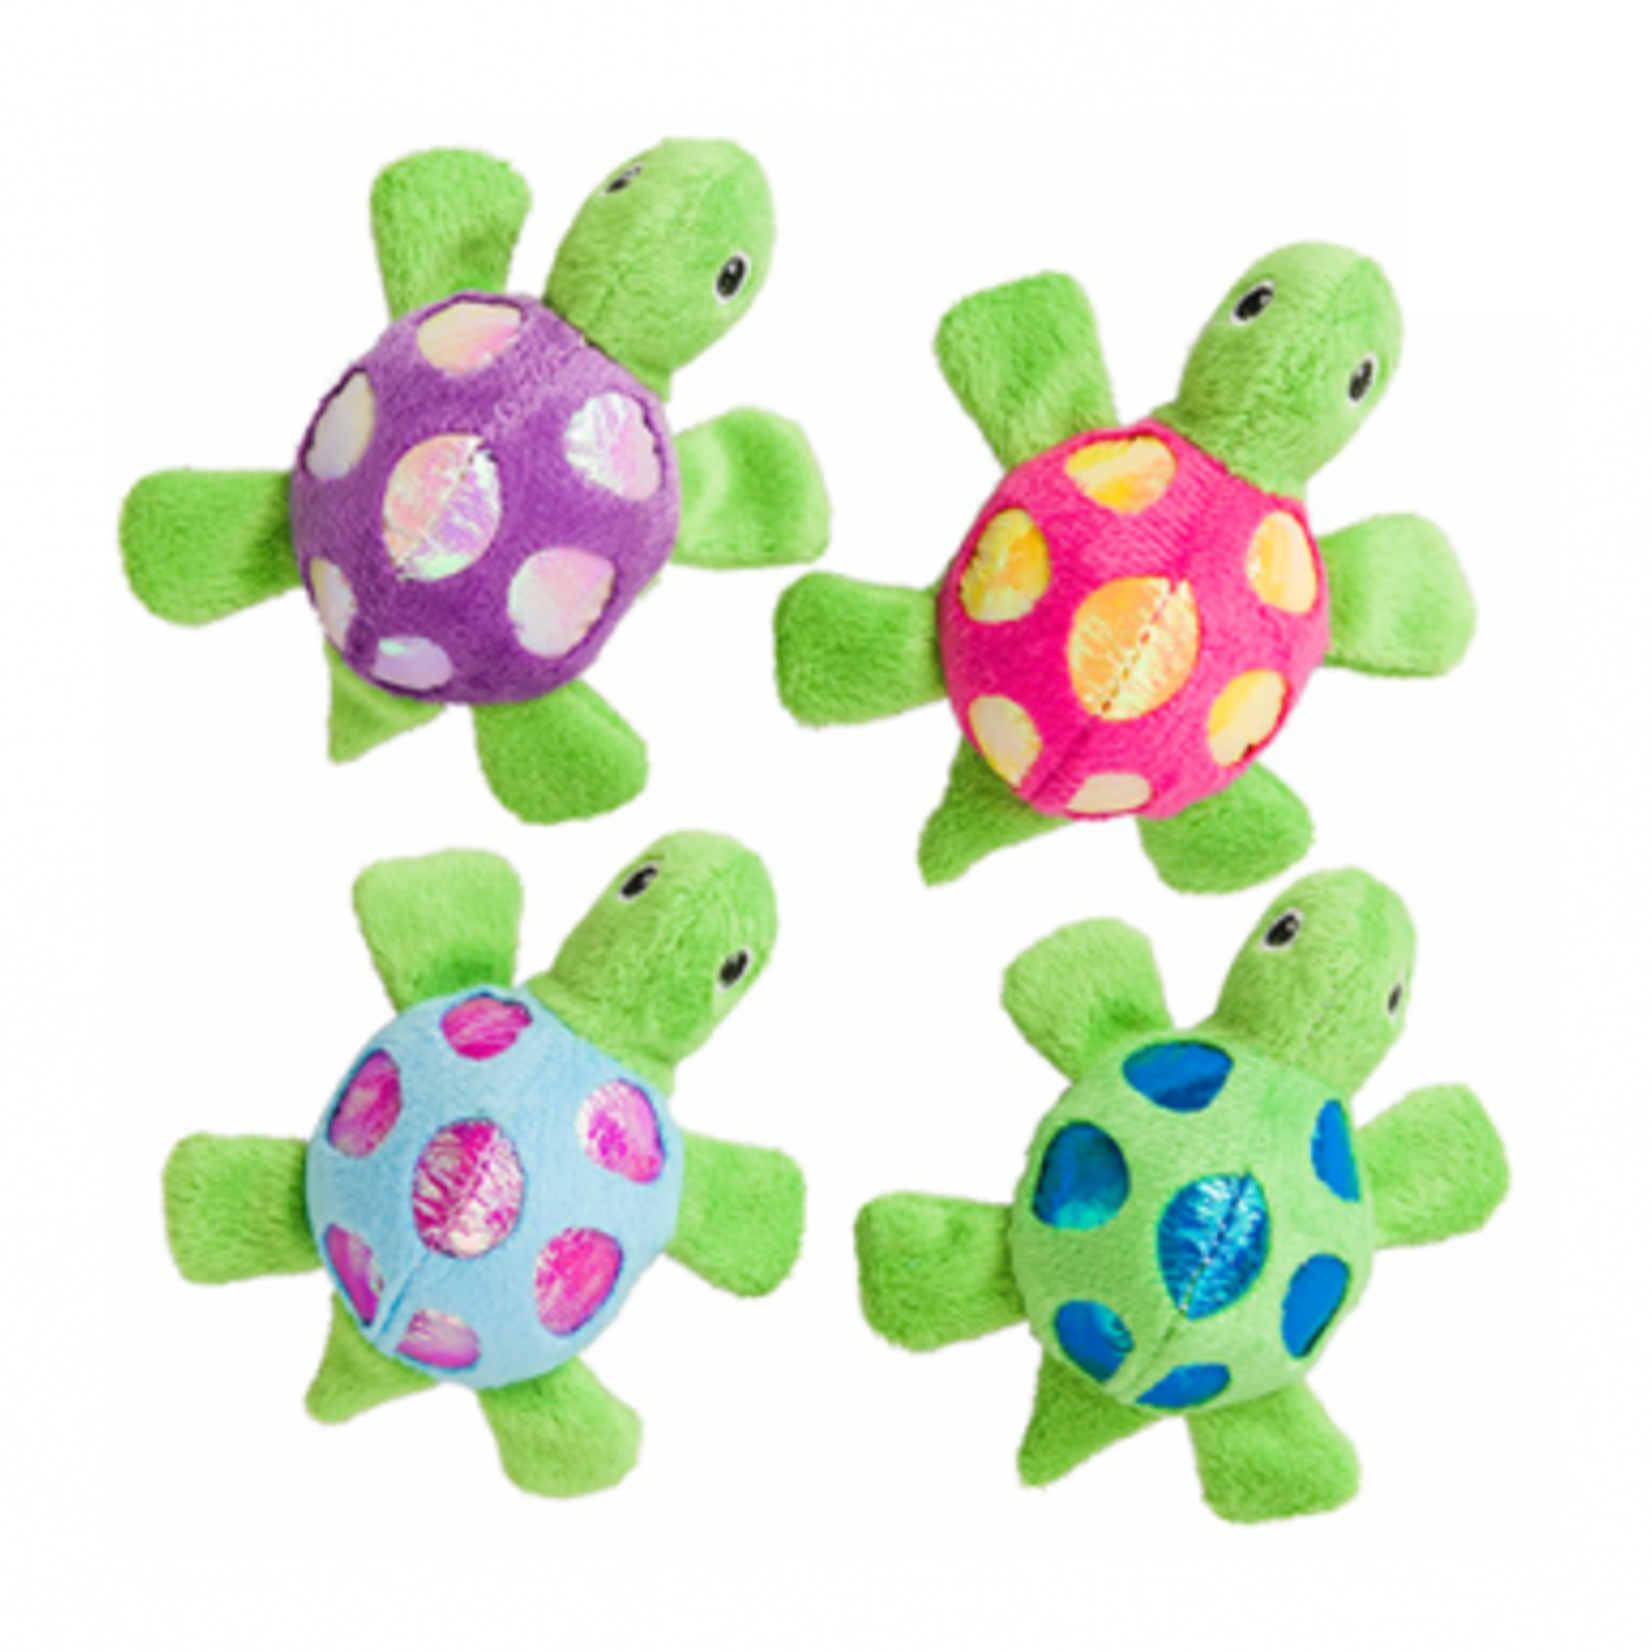 SPOT Shimmer Glimmer Turtle with Catnip - Sold individually